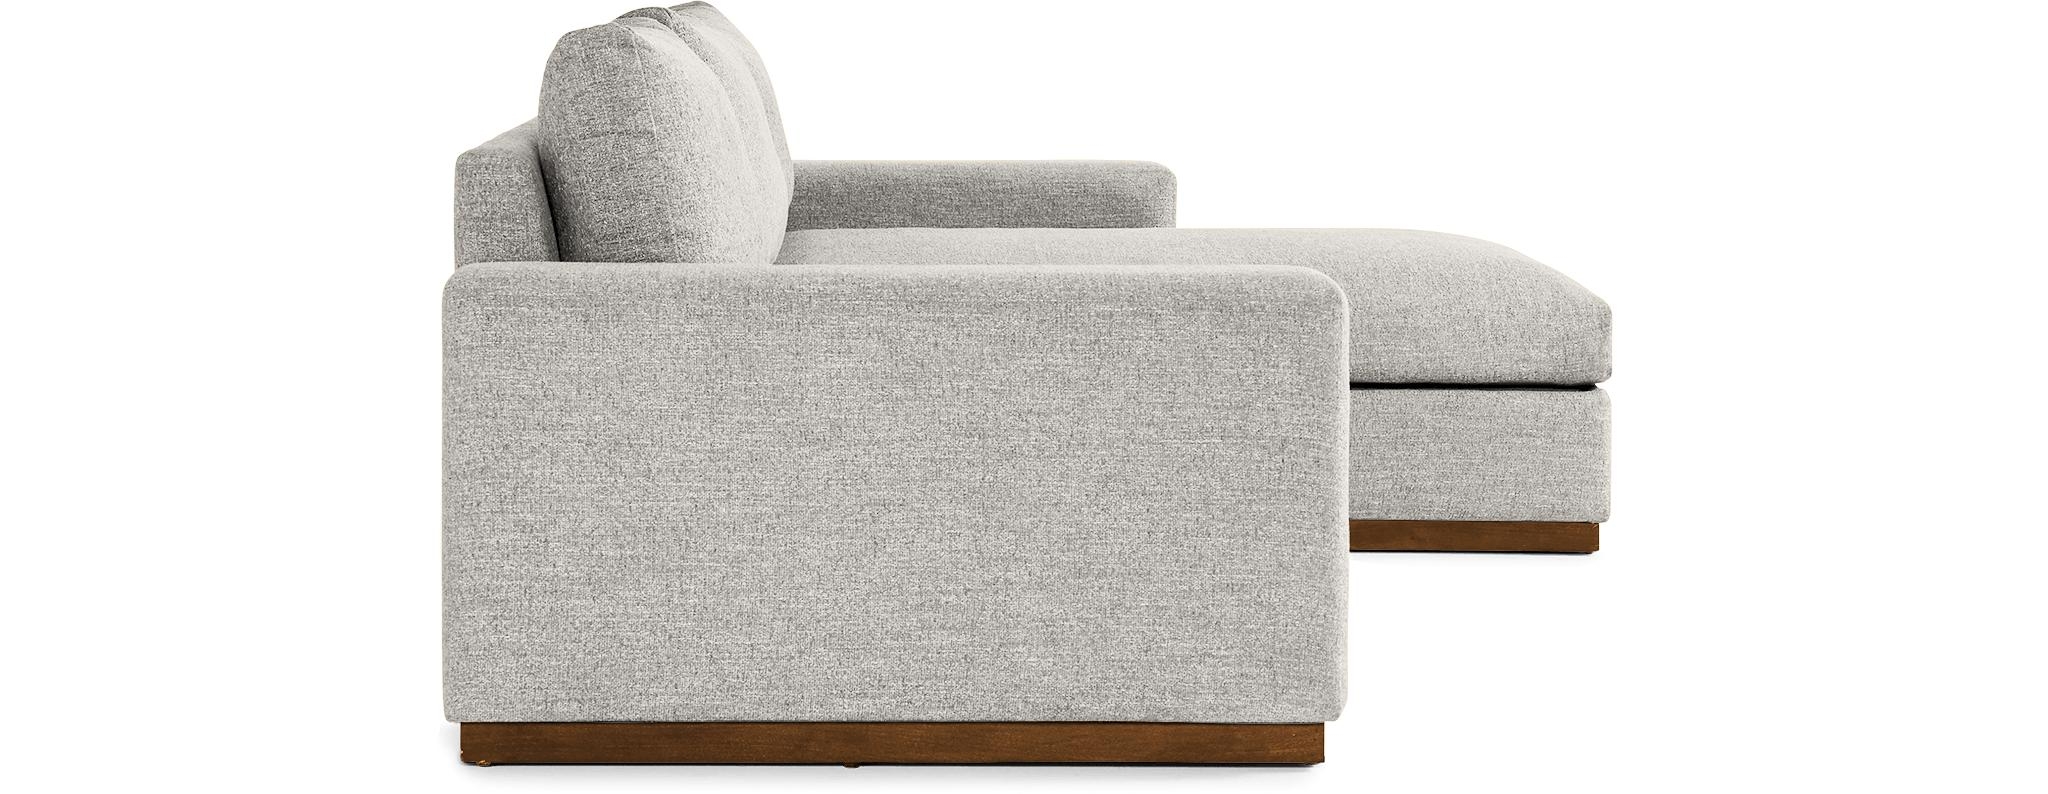 White Holt Mid Century Modern Sectional with Storage - Tussah Snow - Mocha - Left - Image 2